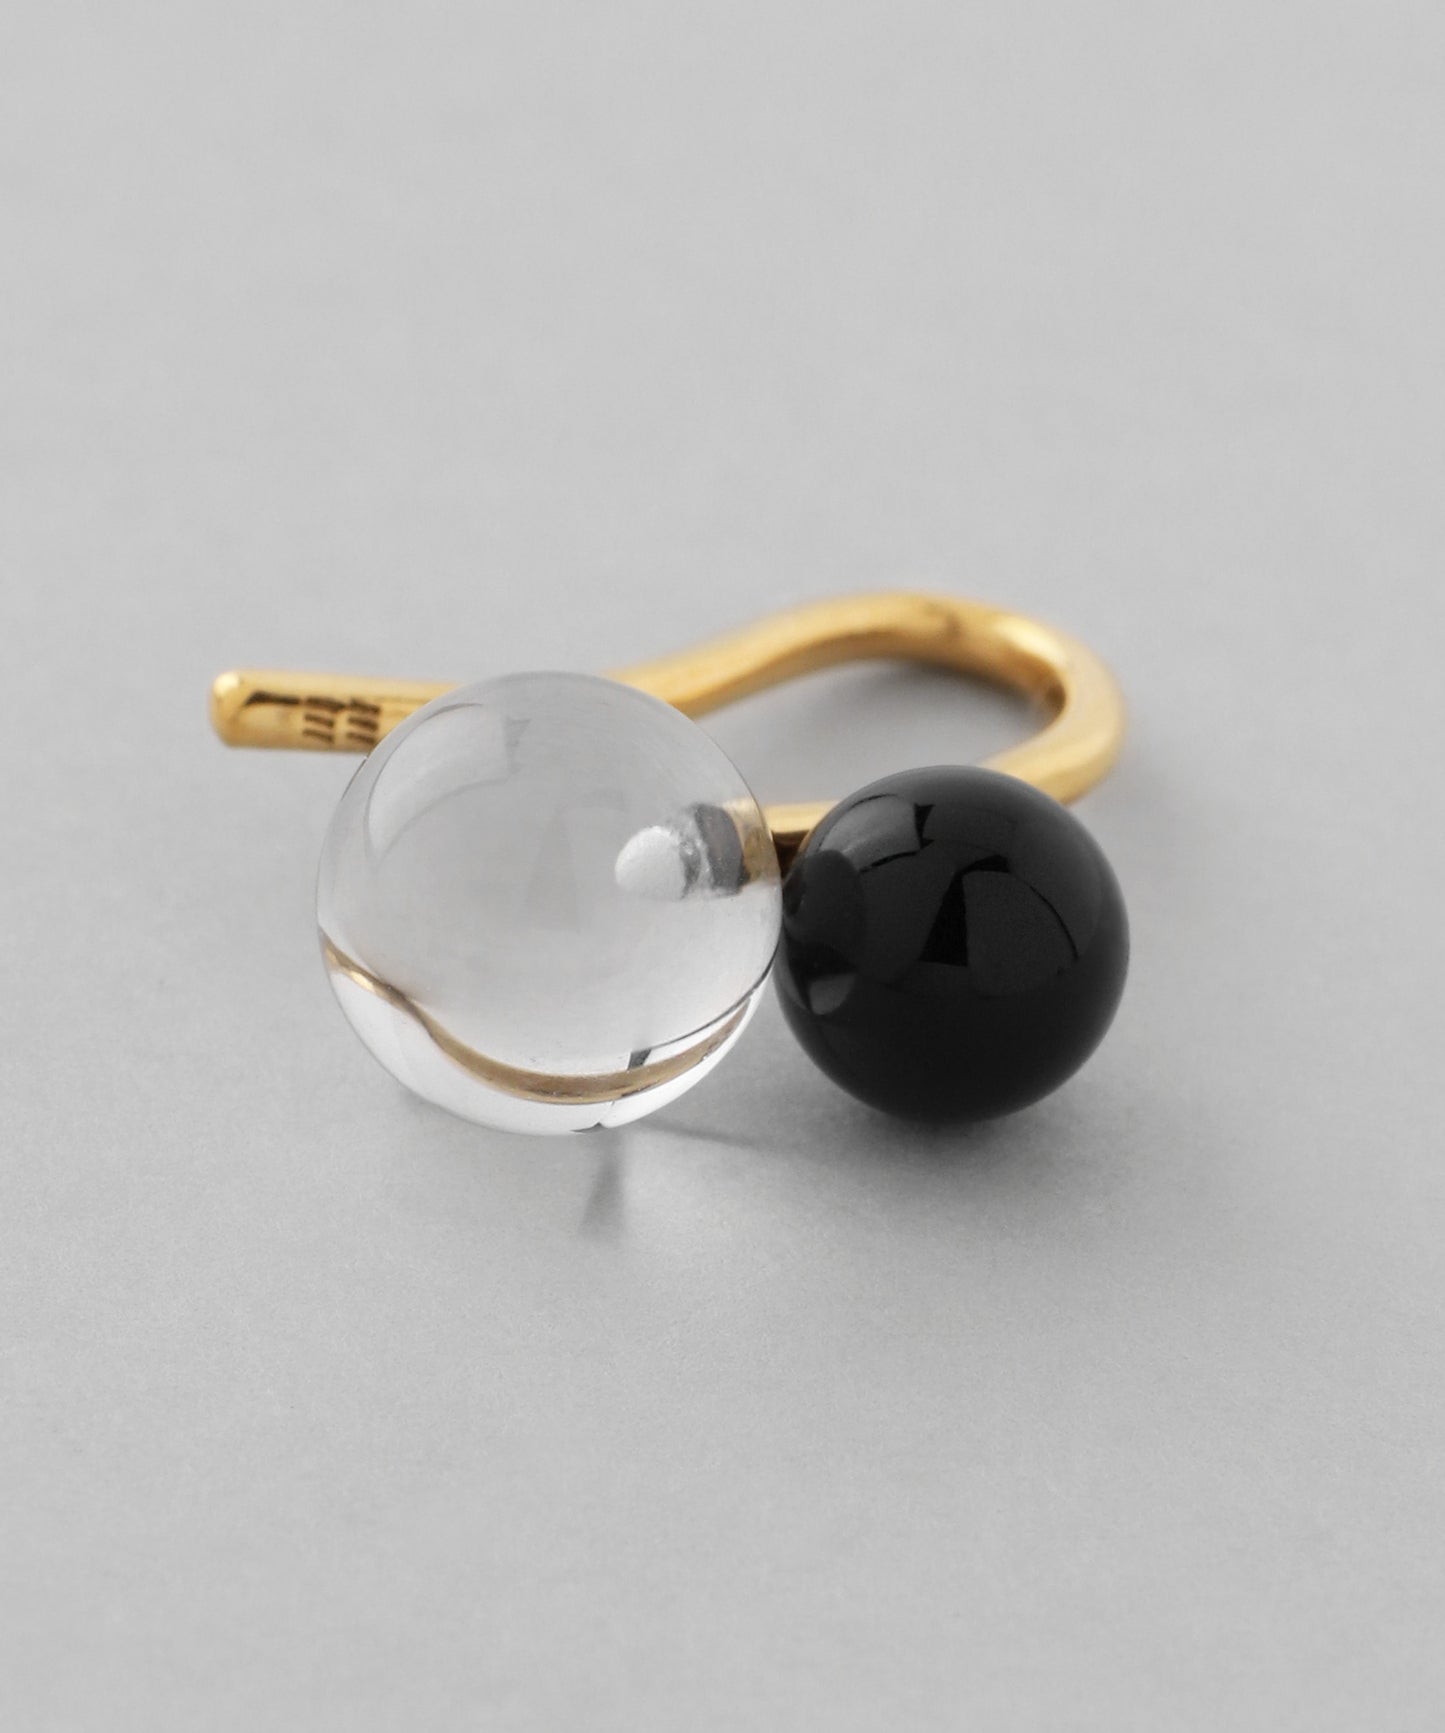 【Stainless Seel IP】Onyx × Crystal Ear Cuff